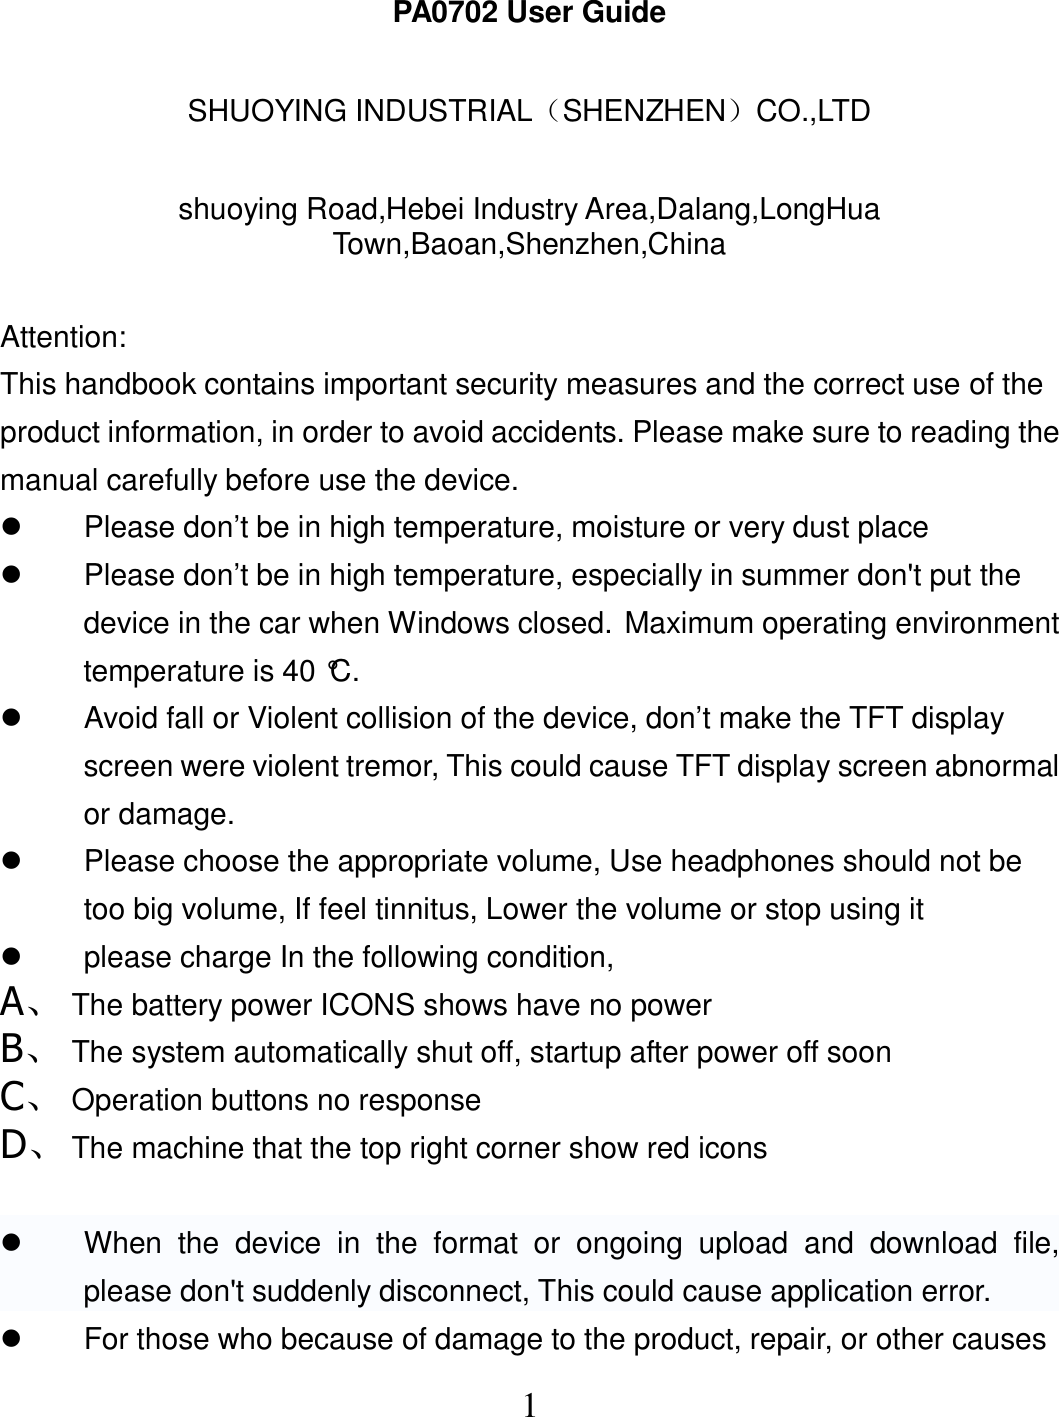  1PA0702 User Guide  SHUOYING INDUSTRIAL（SHENZHEN）CO.,LTD  shuoying Road,Hebei Industry Area,Dalang,LongHua Town,Baoan,Shenzhen,China  Attention: This handbook contains important security measures and the correct use of the product information, in order to avoid accidents. Please make sure to reading the manual carefully before use the device.   Please don’t be in high temperature, moisture or very dust place   Please don’t be in high temperature, especially in summer don&apos;t put the device in the car when Windows closed. Maximum operating environment temperature is 40 °C.   Avoid fall or Violent collision of the device, don’t make the TFT display screen were violent tremor, This could cause TFT display screen abnormal or damage.   Please choose the appropriate volume, Use headphones should not be too big volume, If feel tinnitus, Lower the volume or stop using it   please charge In the following condition, A、 The battery power ICONS shows have no power B、 The system automatically shut off, startup after power off soon C、 Operation buttons no response D、 The machine that the top right corner show red icons    When  the  device  in  the  format  or  ongoing  upload  and  download  file, please don&apos;t suddenly disconnect, This could cause application error.   For those who because of damage to the product, repair, or other causes 